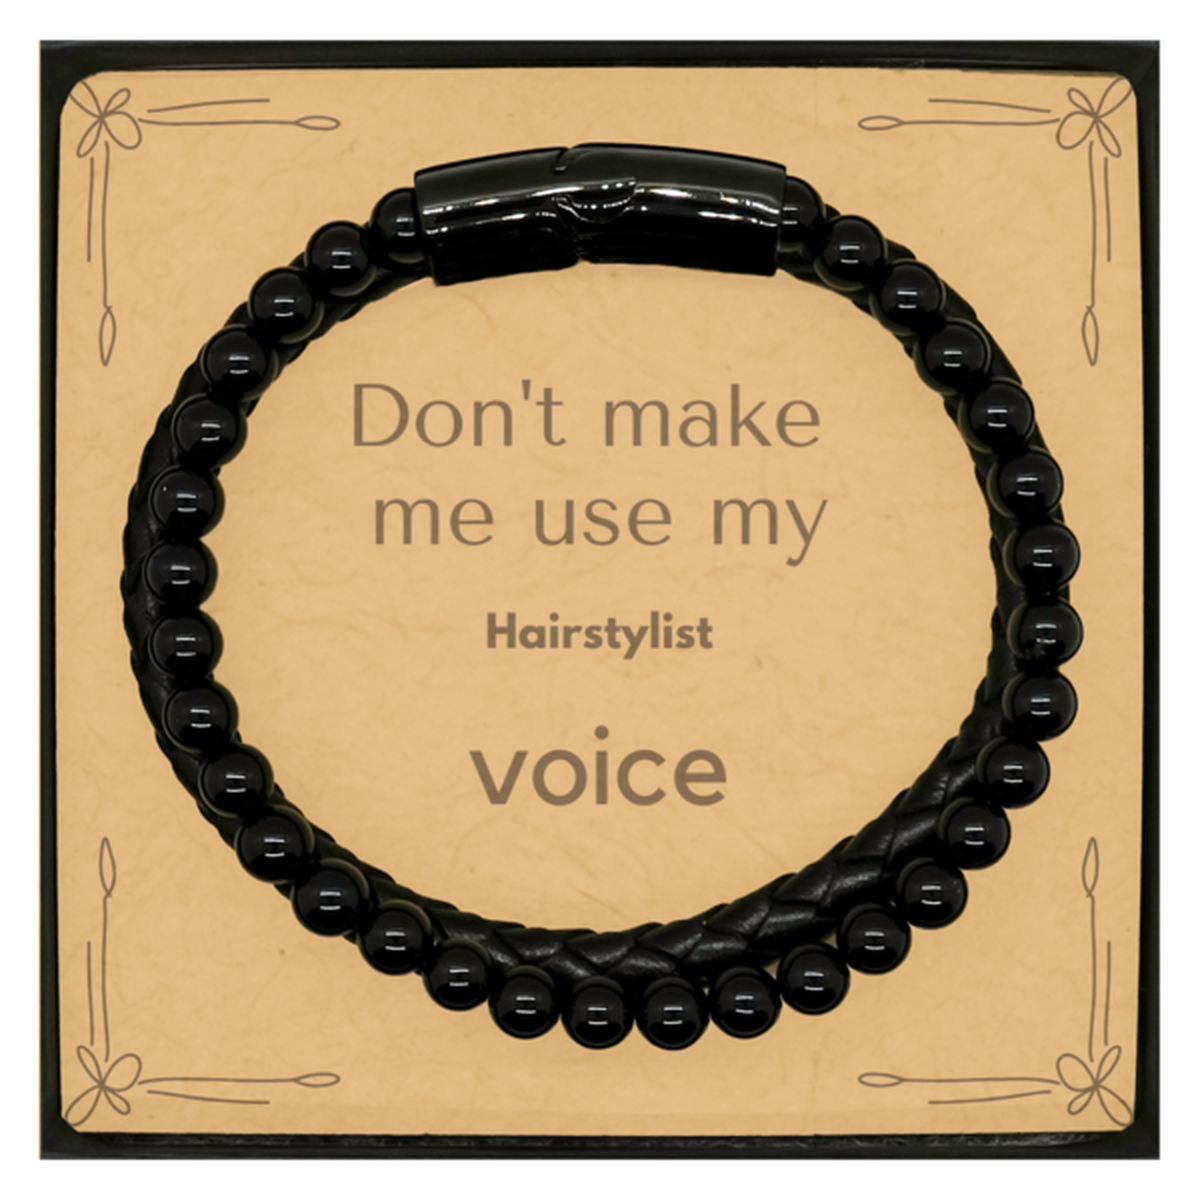 Don't make me use my Hairstylist voice, Sarcasm Hairstylist Card Gifts, Christmas Hairstylist Stone Leather Bracelets Birthday Unique Gifts For Hairstylist Coworkers, Men, Women, Colleague, Friends